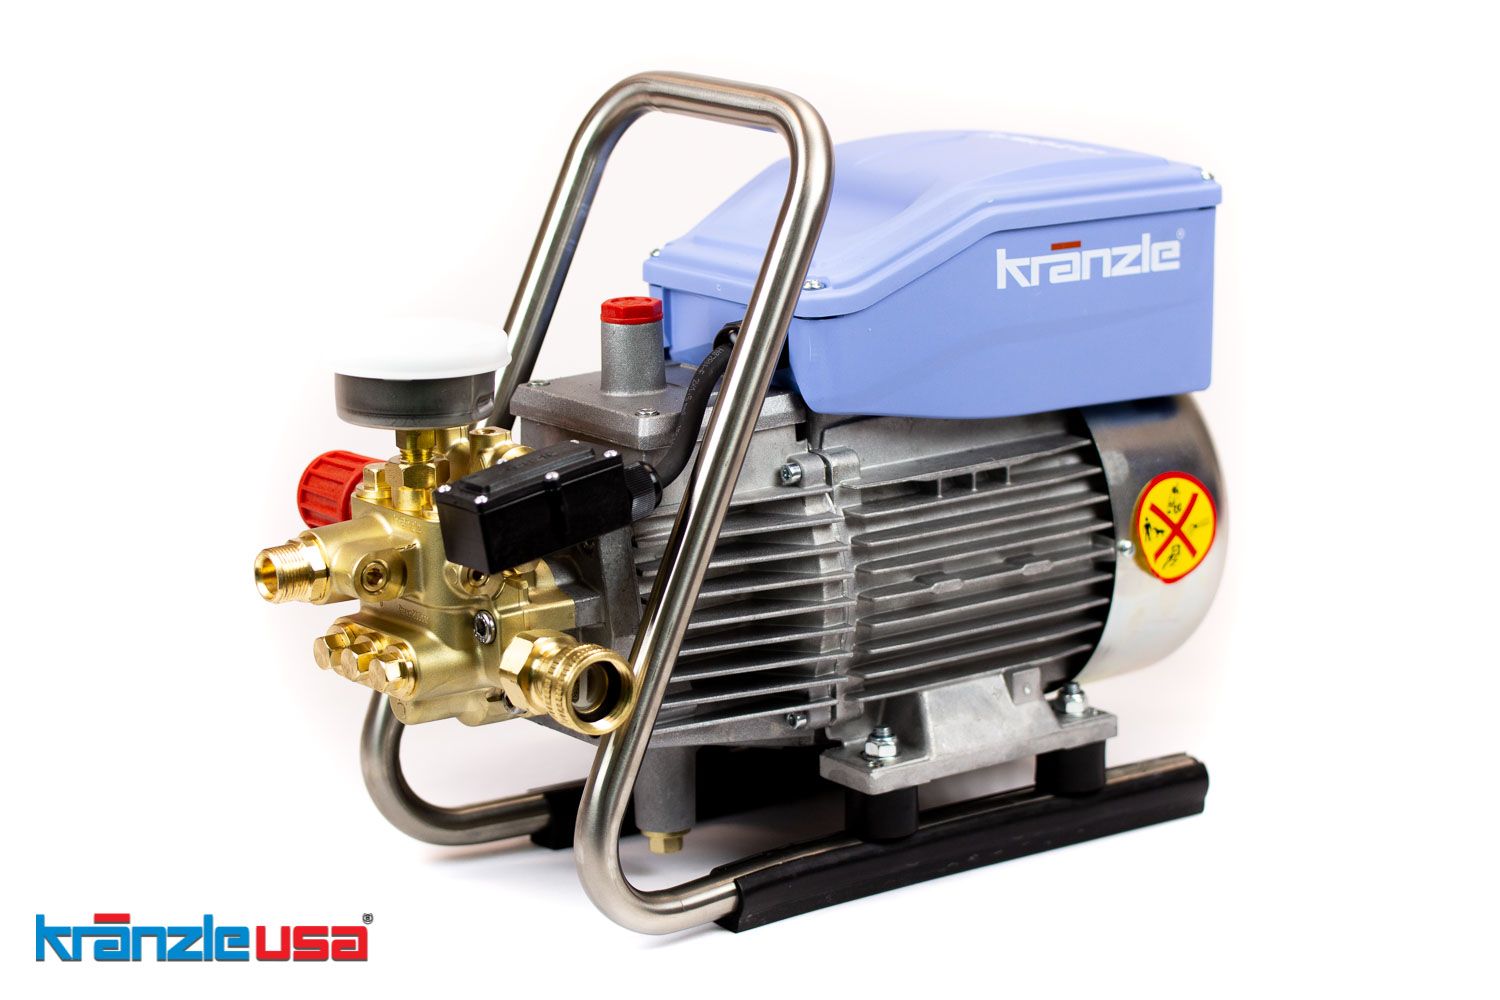 1622TS Pressure washer for light industrial use such as car detailing, warehouse use, 3D printing, etc